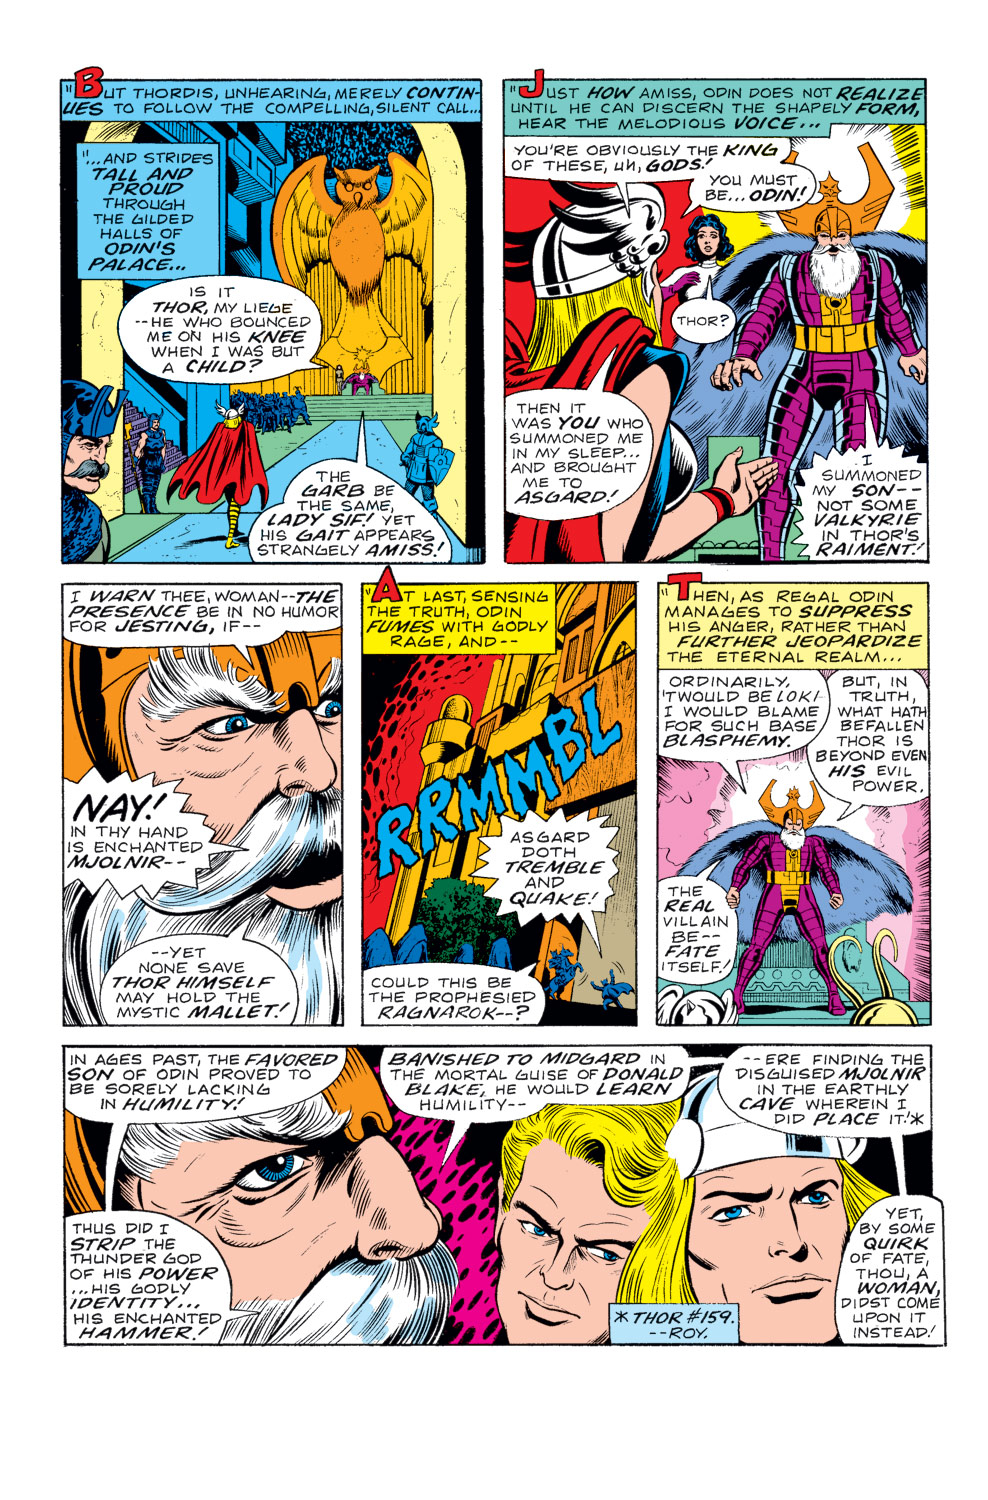 What If? (1977) issue 10 - Jane Foster had found the hammer of Thor - Page 19